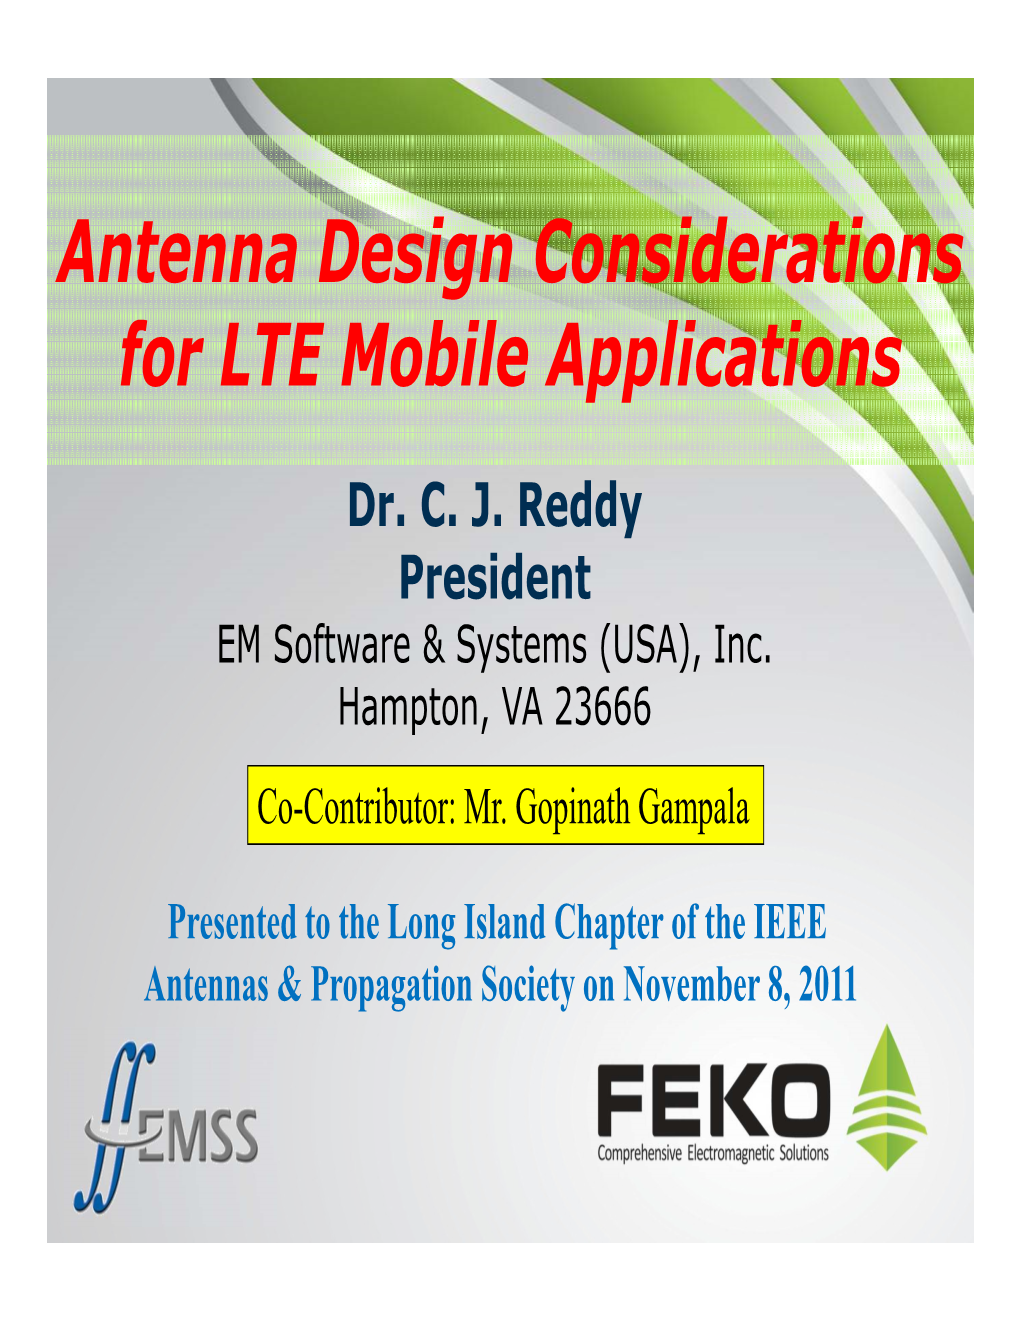 Antenna Design Considerations for LTE Mobile Applications